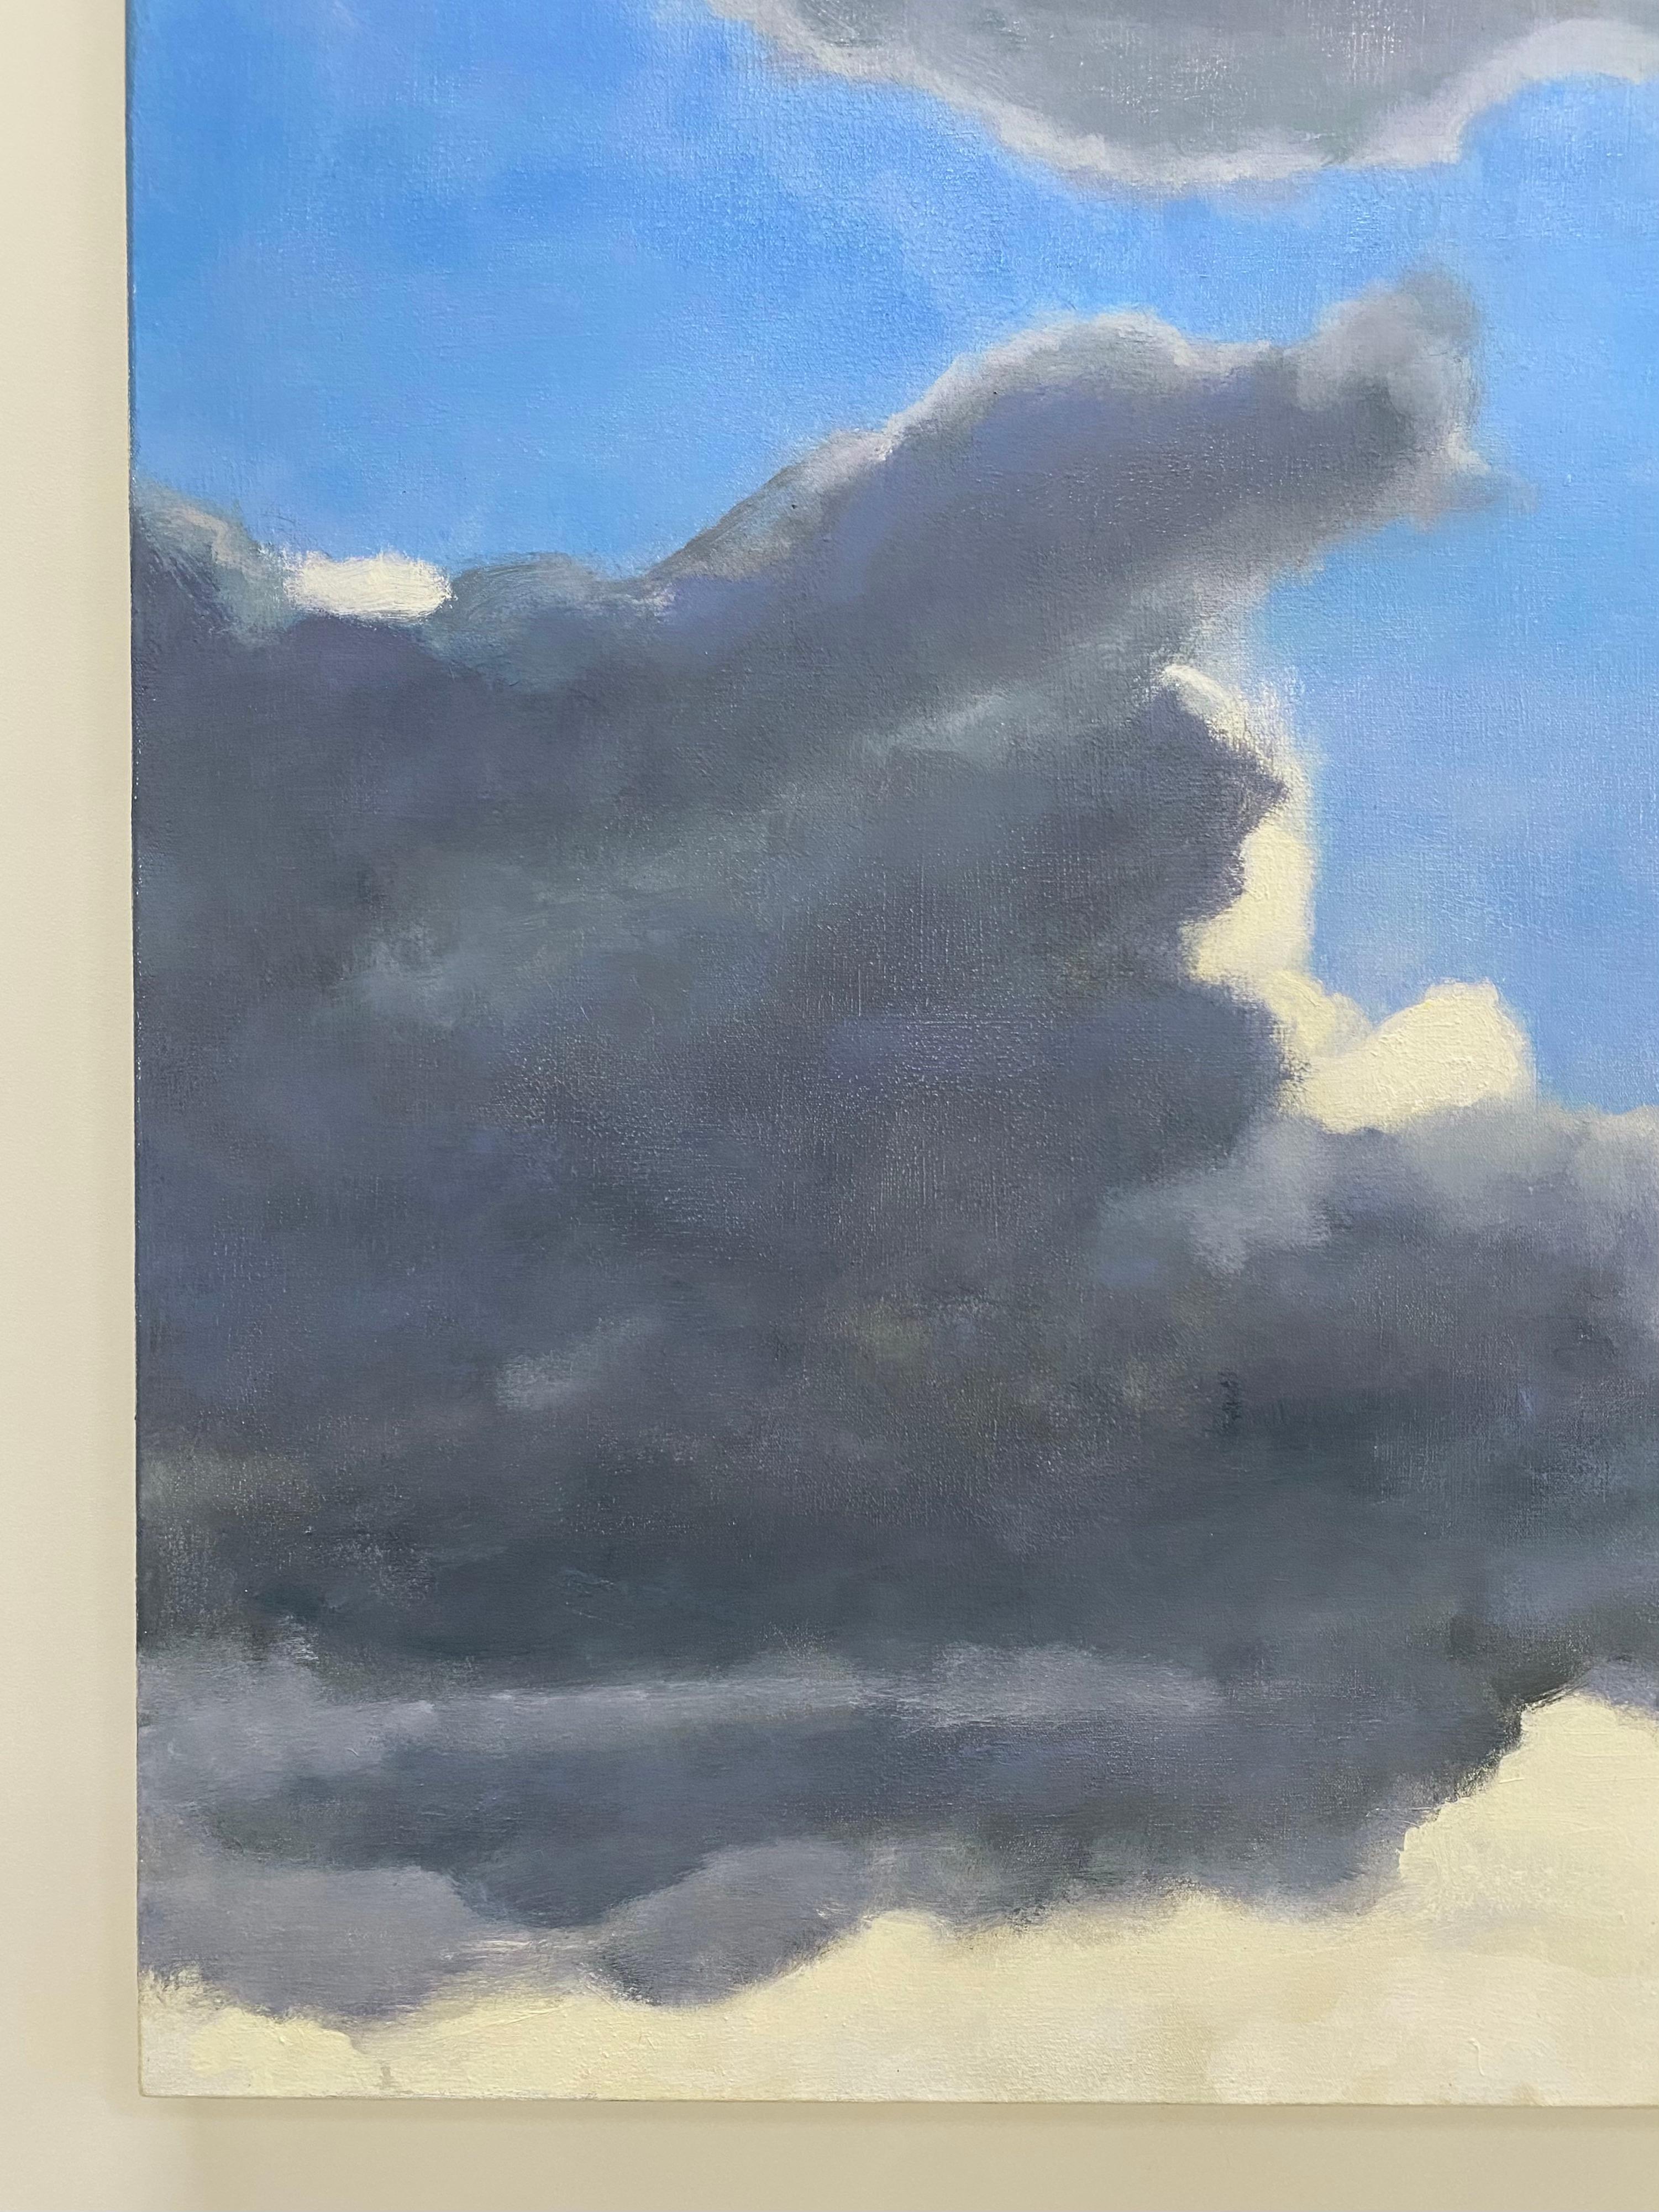 The drama and sublime beauty of the vast sky in New York State's Hudson Valley is captured in this dramatic skyscape painting by David Konigsberg. The artist is widely recognized for clouds and this painting is one of his best - it is a symphony of